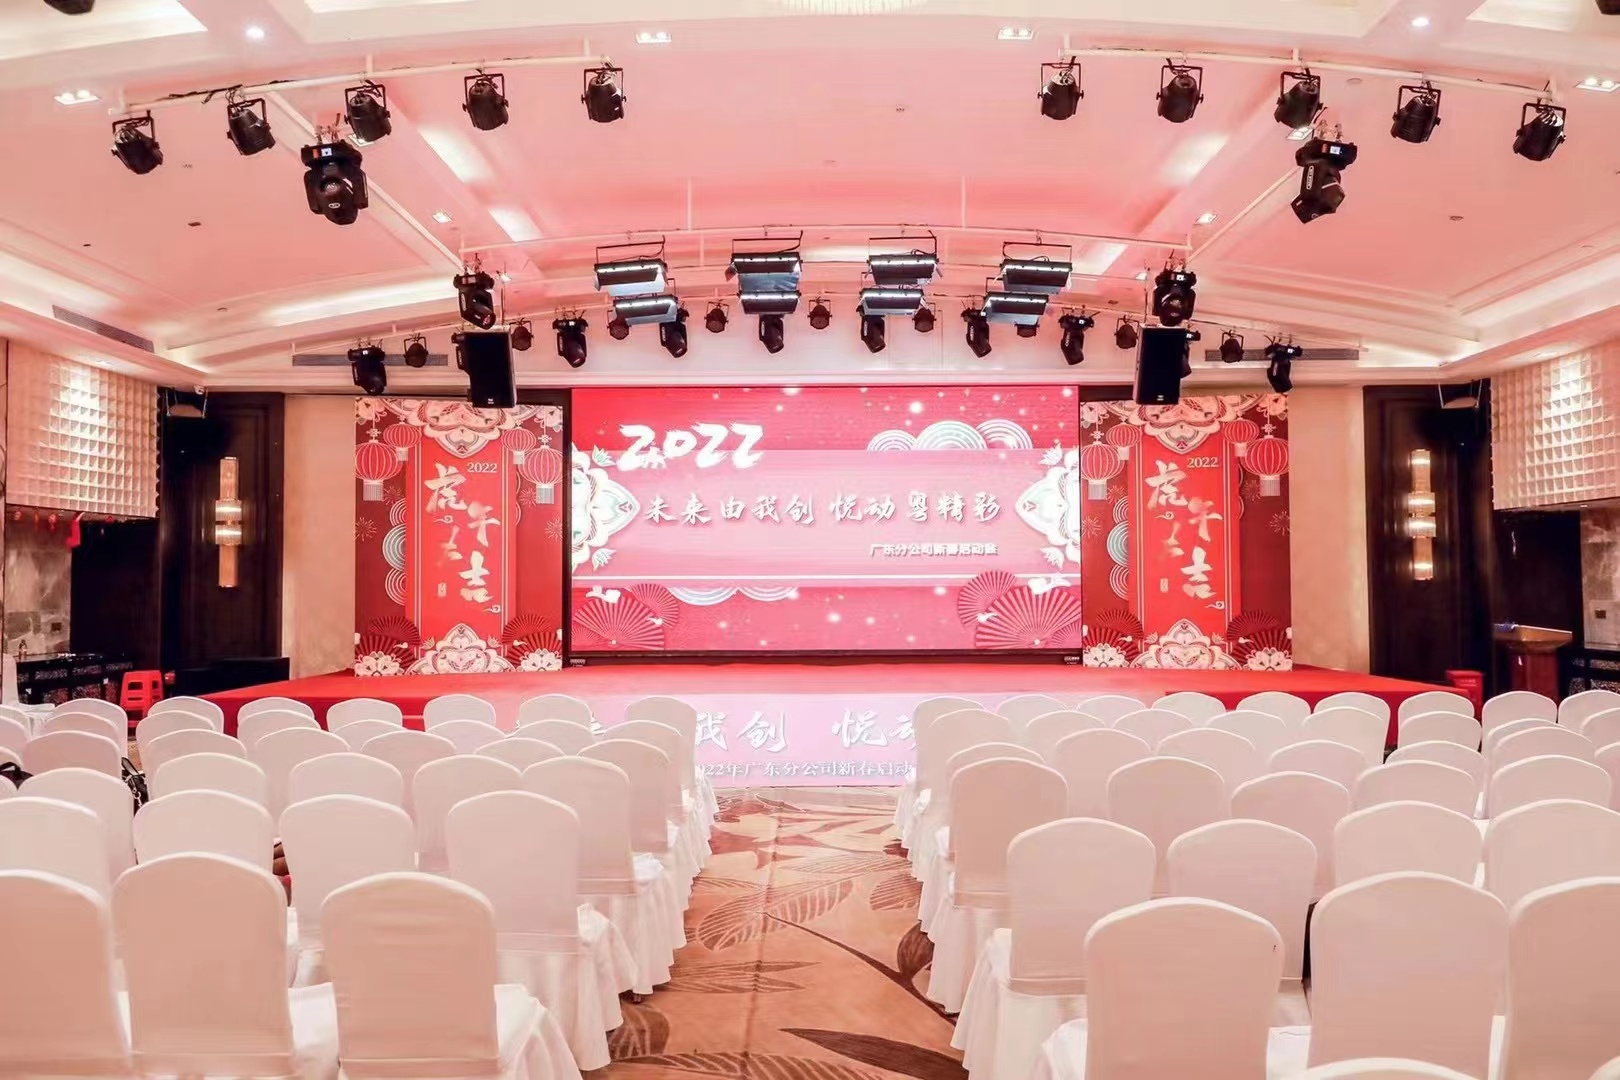 The Annual Conference for The Beginning of Chinese Lunar New Year_D2 Studio_3